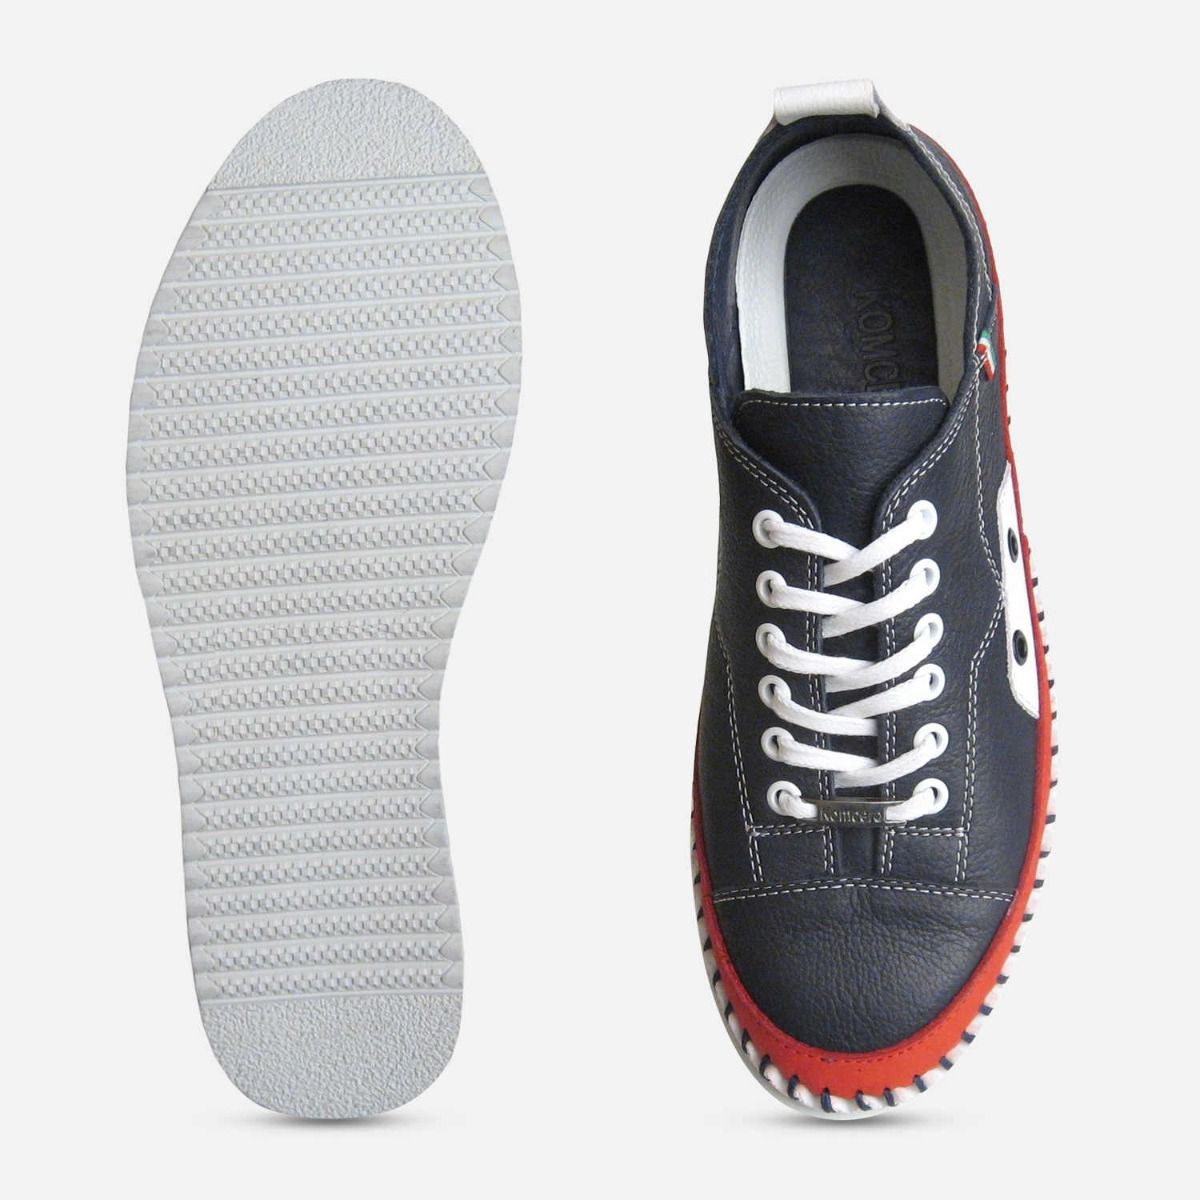 Navy Blue \u0026 Red Lace Up Whipstitch Sneakers